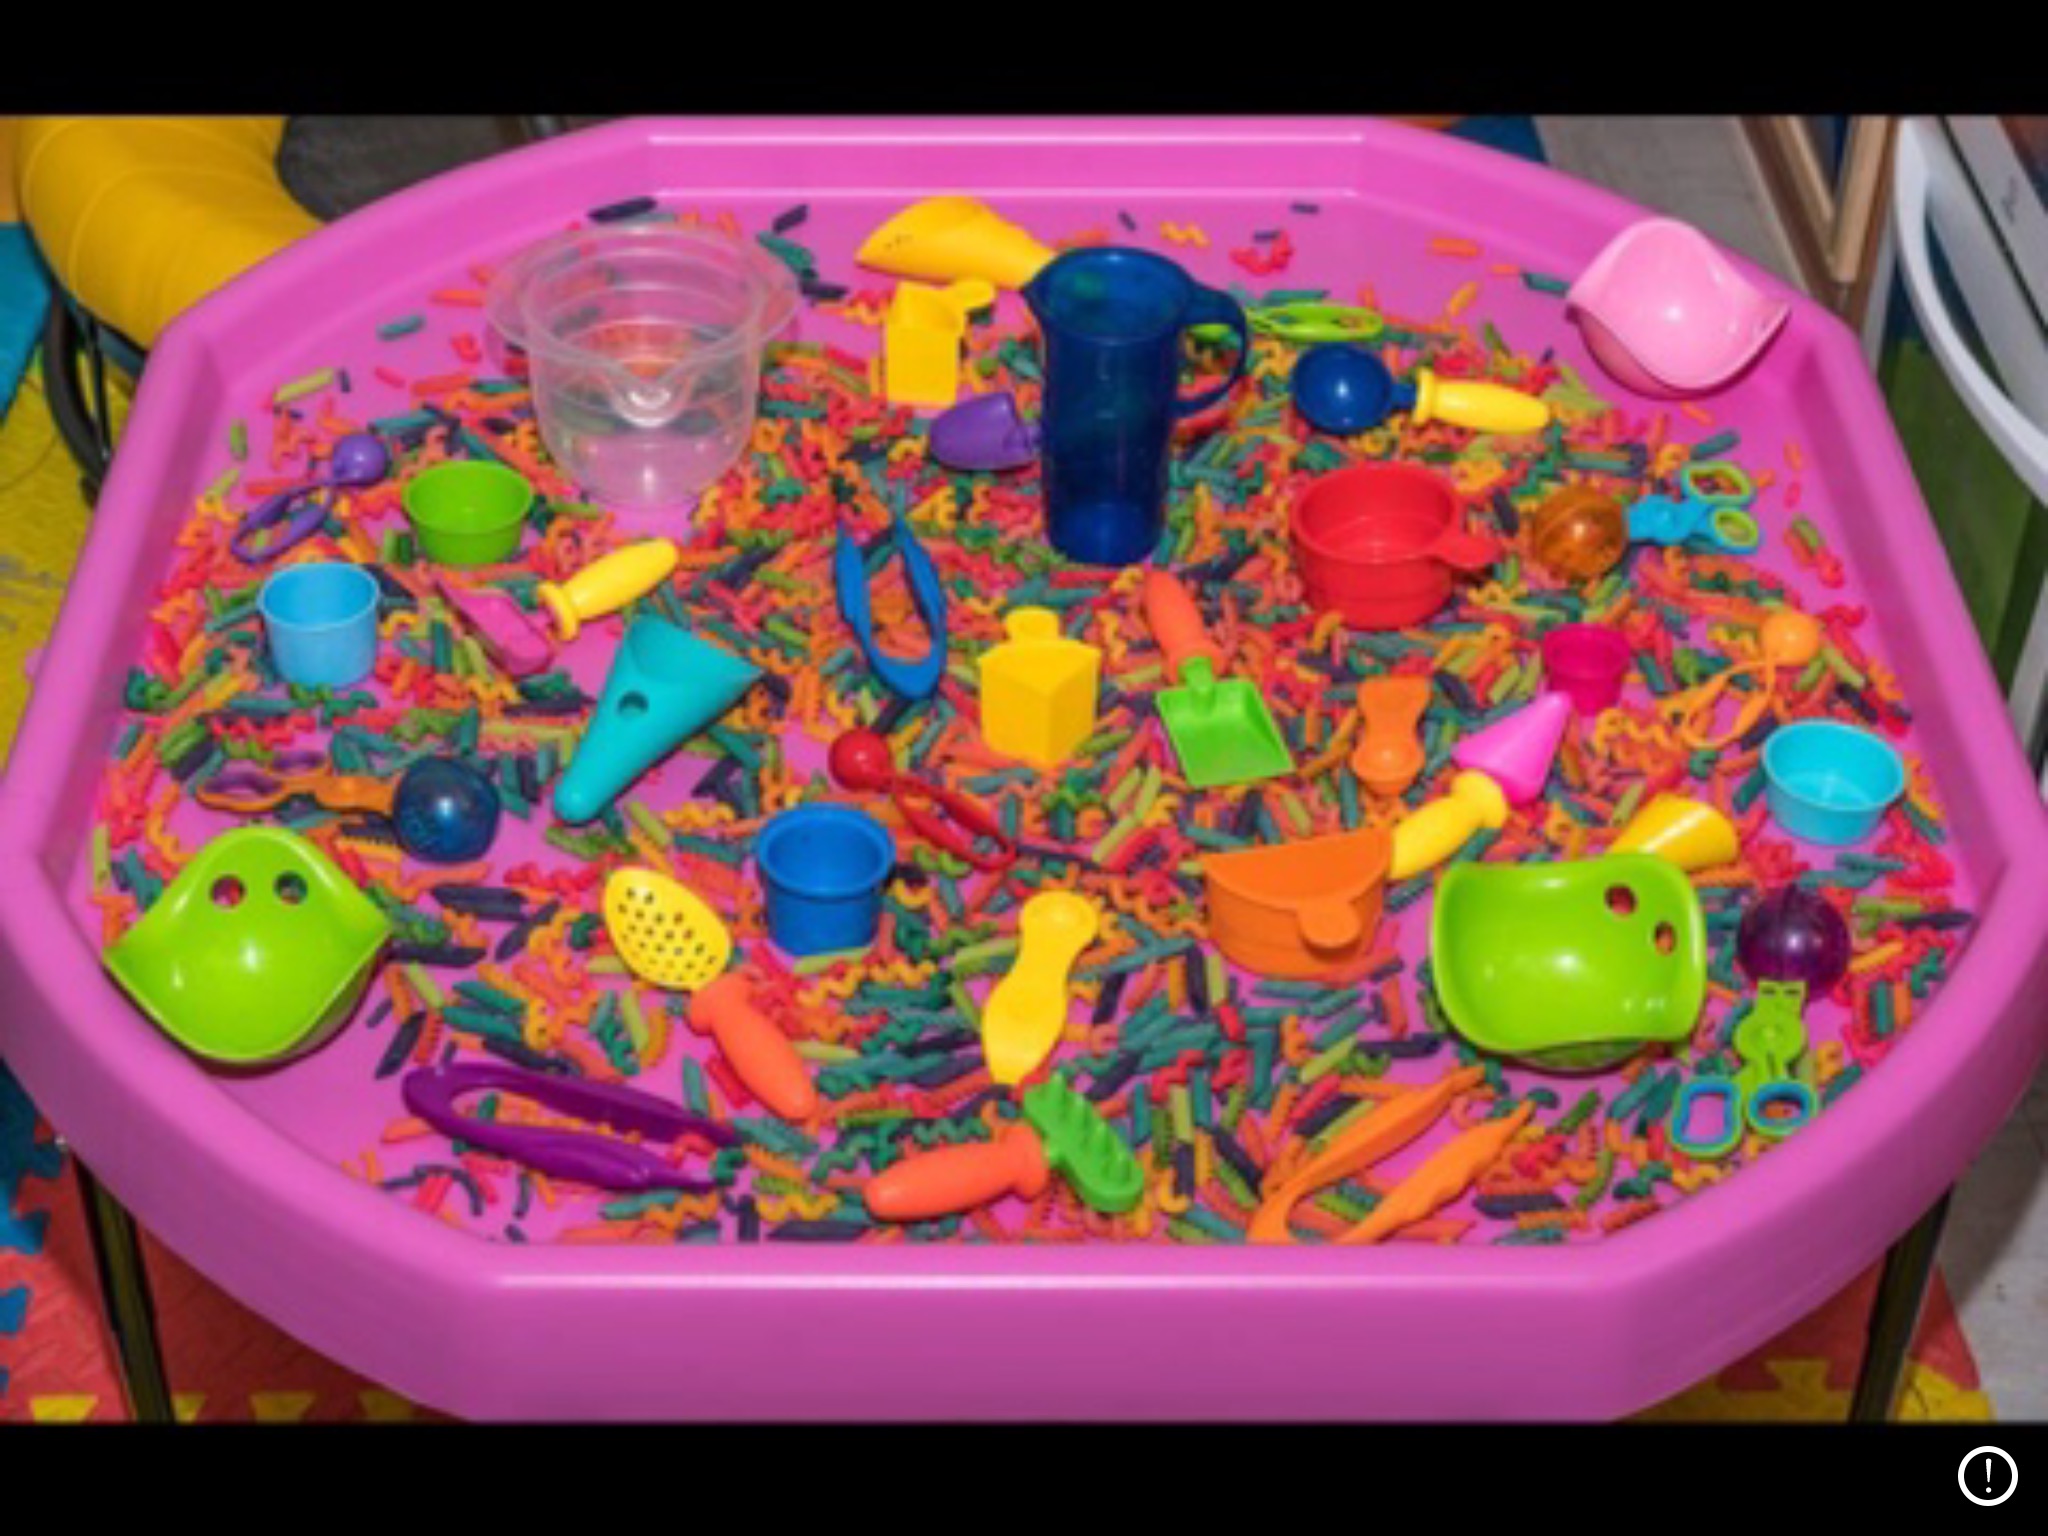 Messy play ideas - Special Needs and Sensory play Ideas